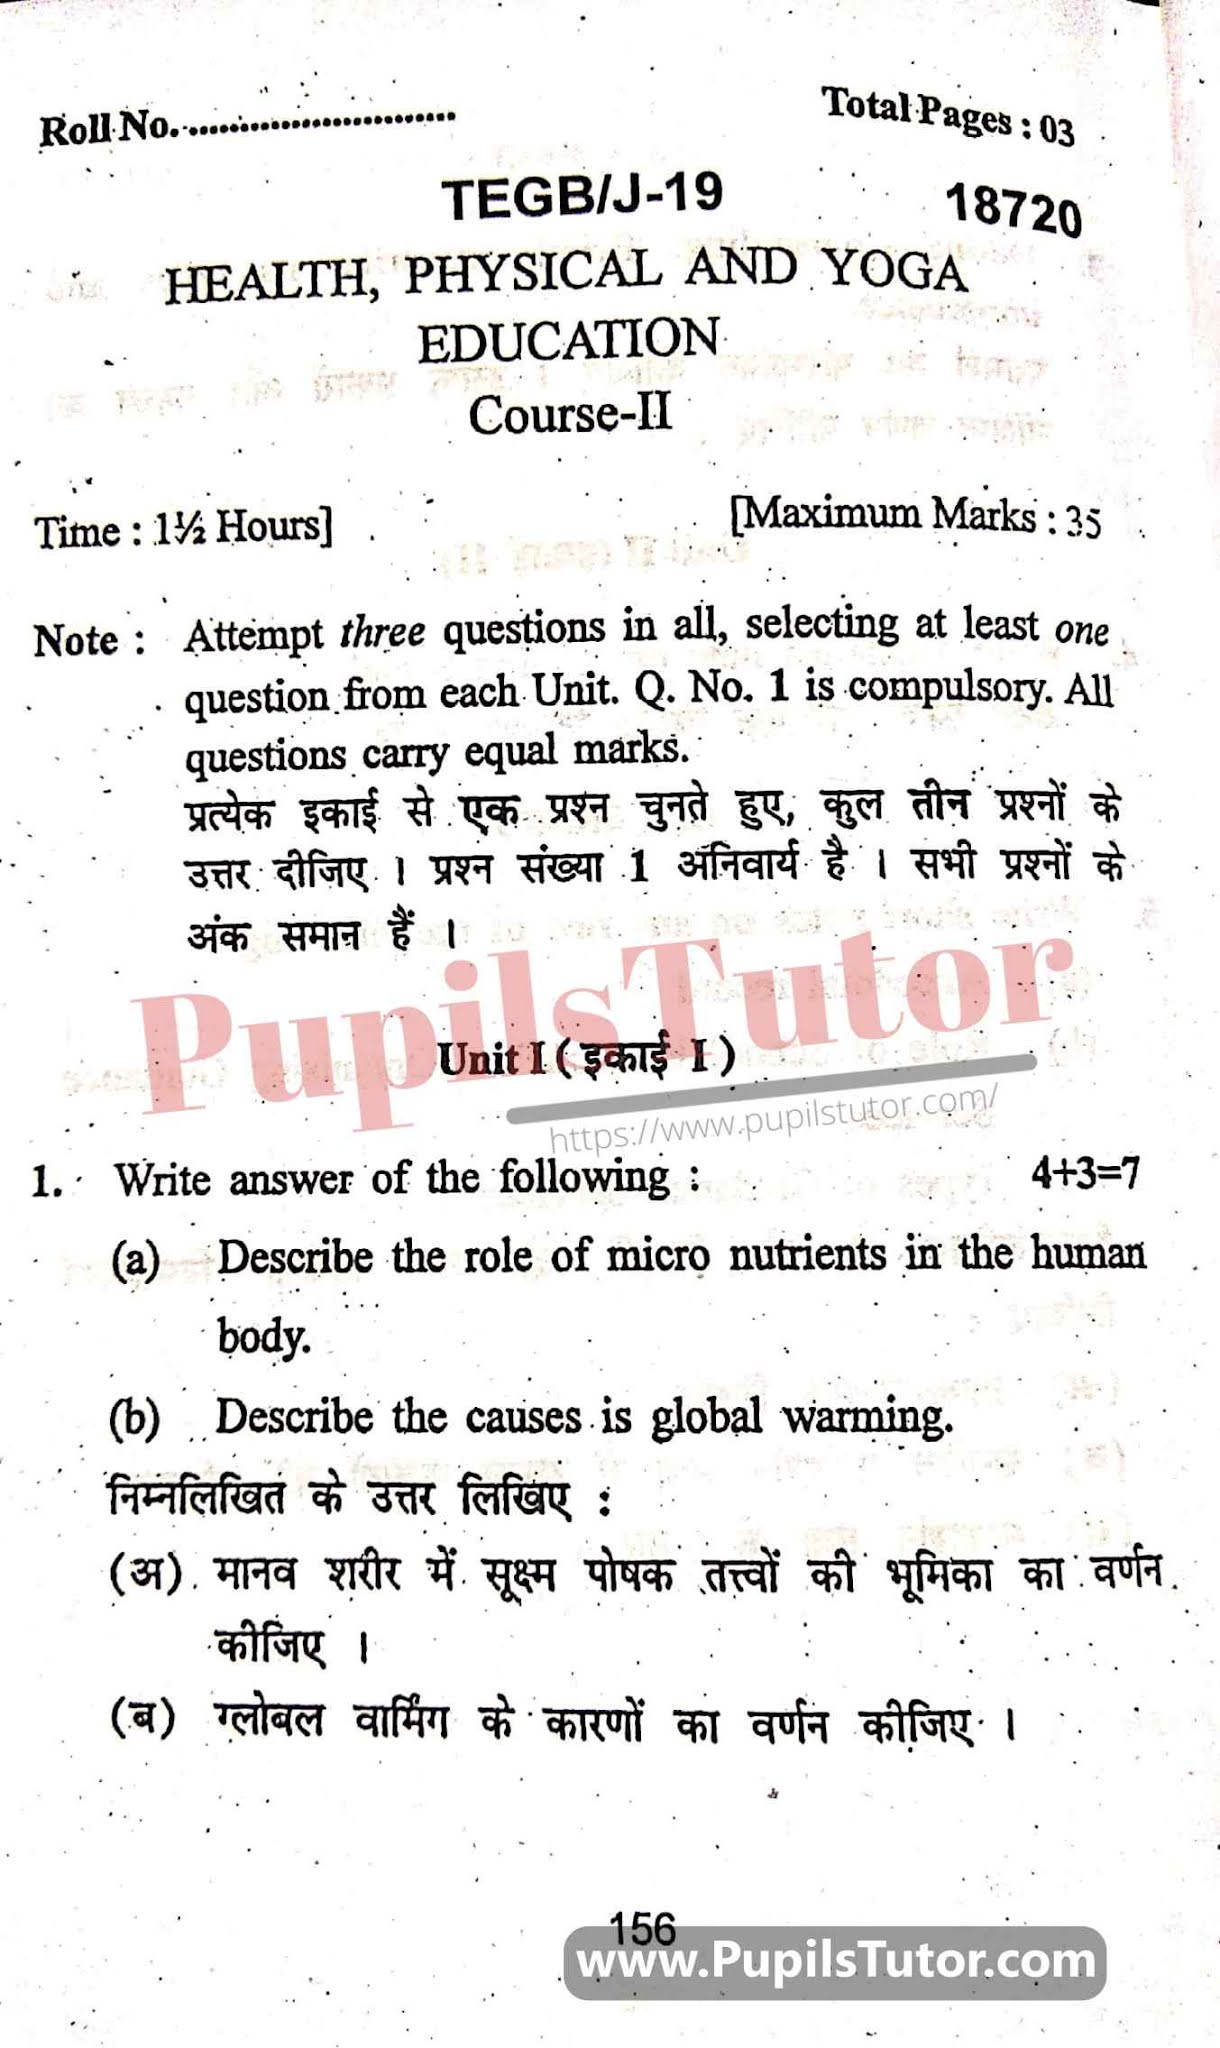 KUK (Kurukshetra University, Haryana) Health Physical And Yoga Education Question Paper 2019 For B.Ed 1st And 2nd Year And All The 4 Semesters In English And Hindi Medium Free Download PDF - Page 1 - Pupils Tutor